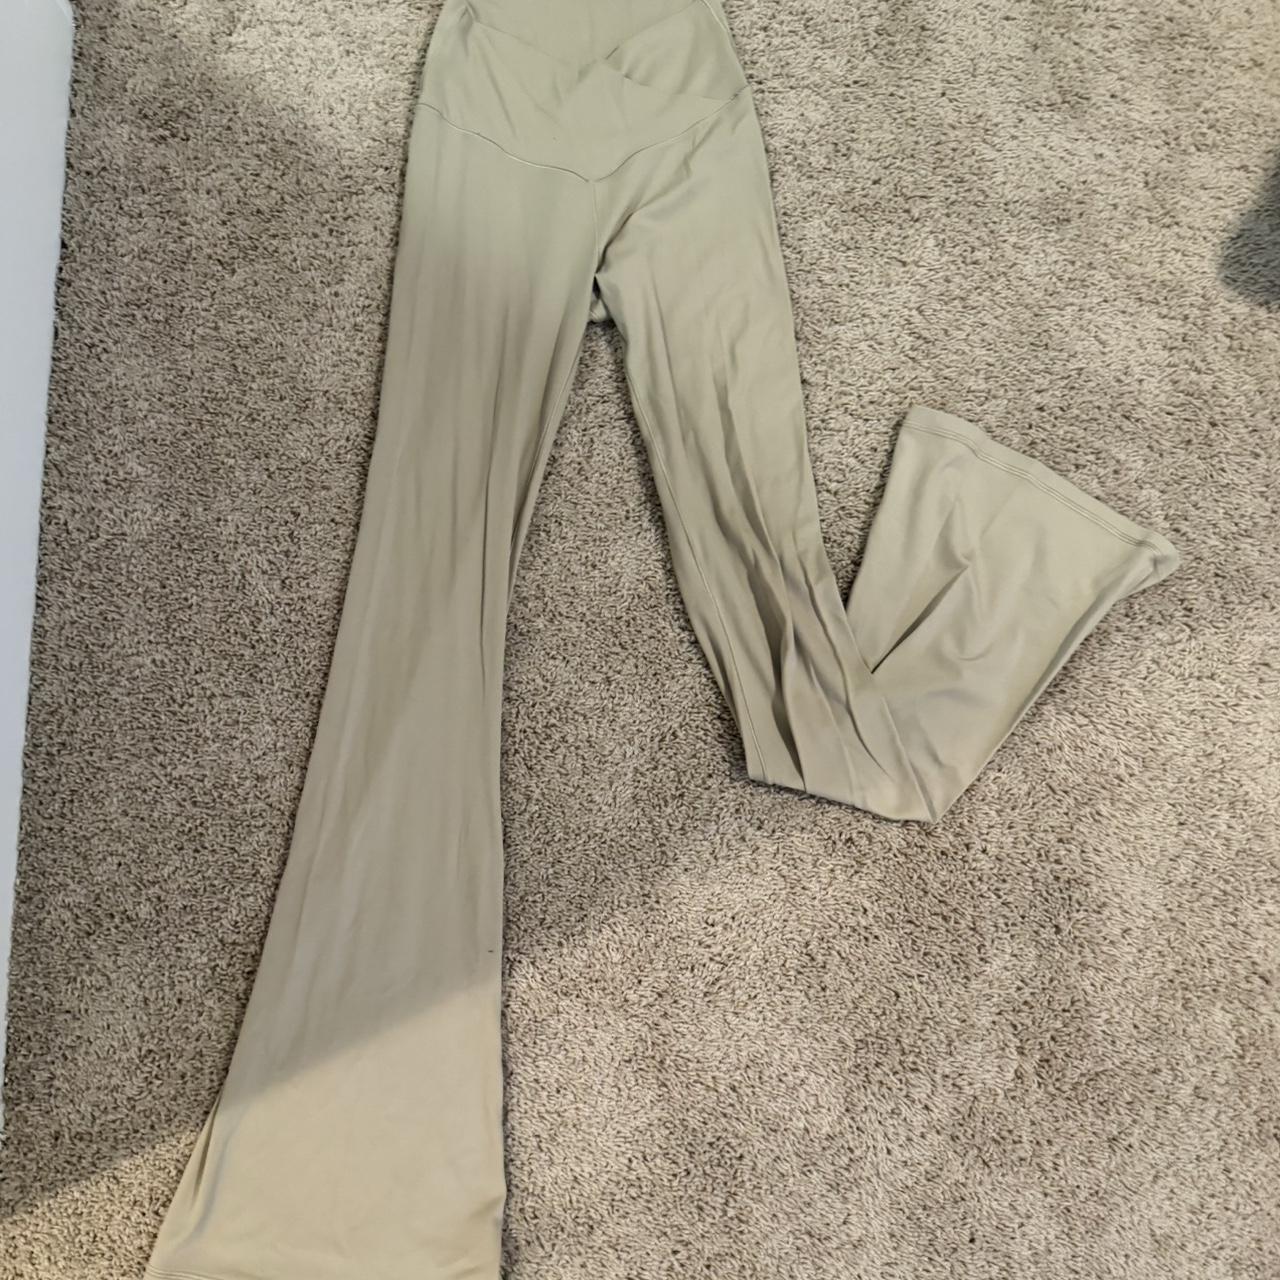 arie crossover flare leggings size small - Depop